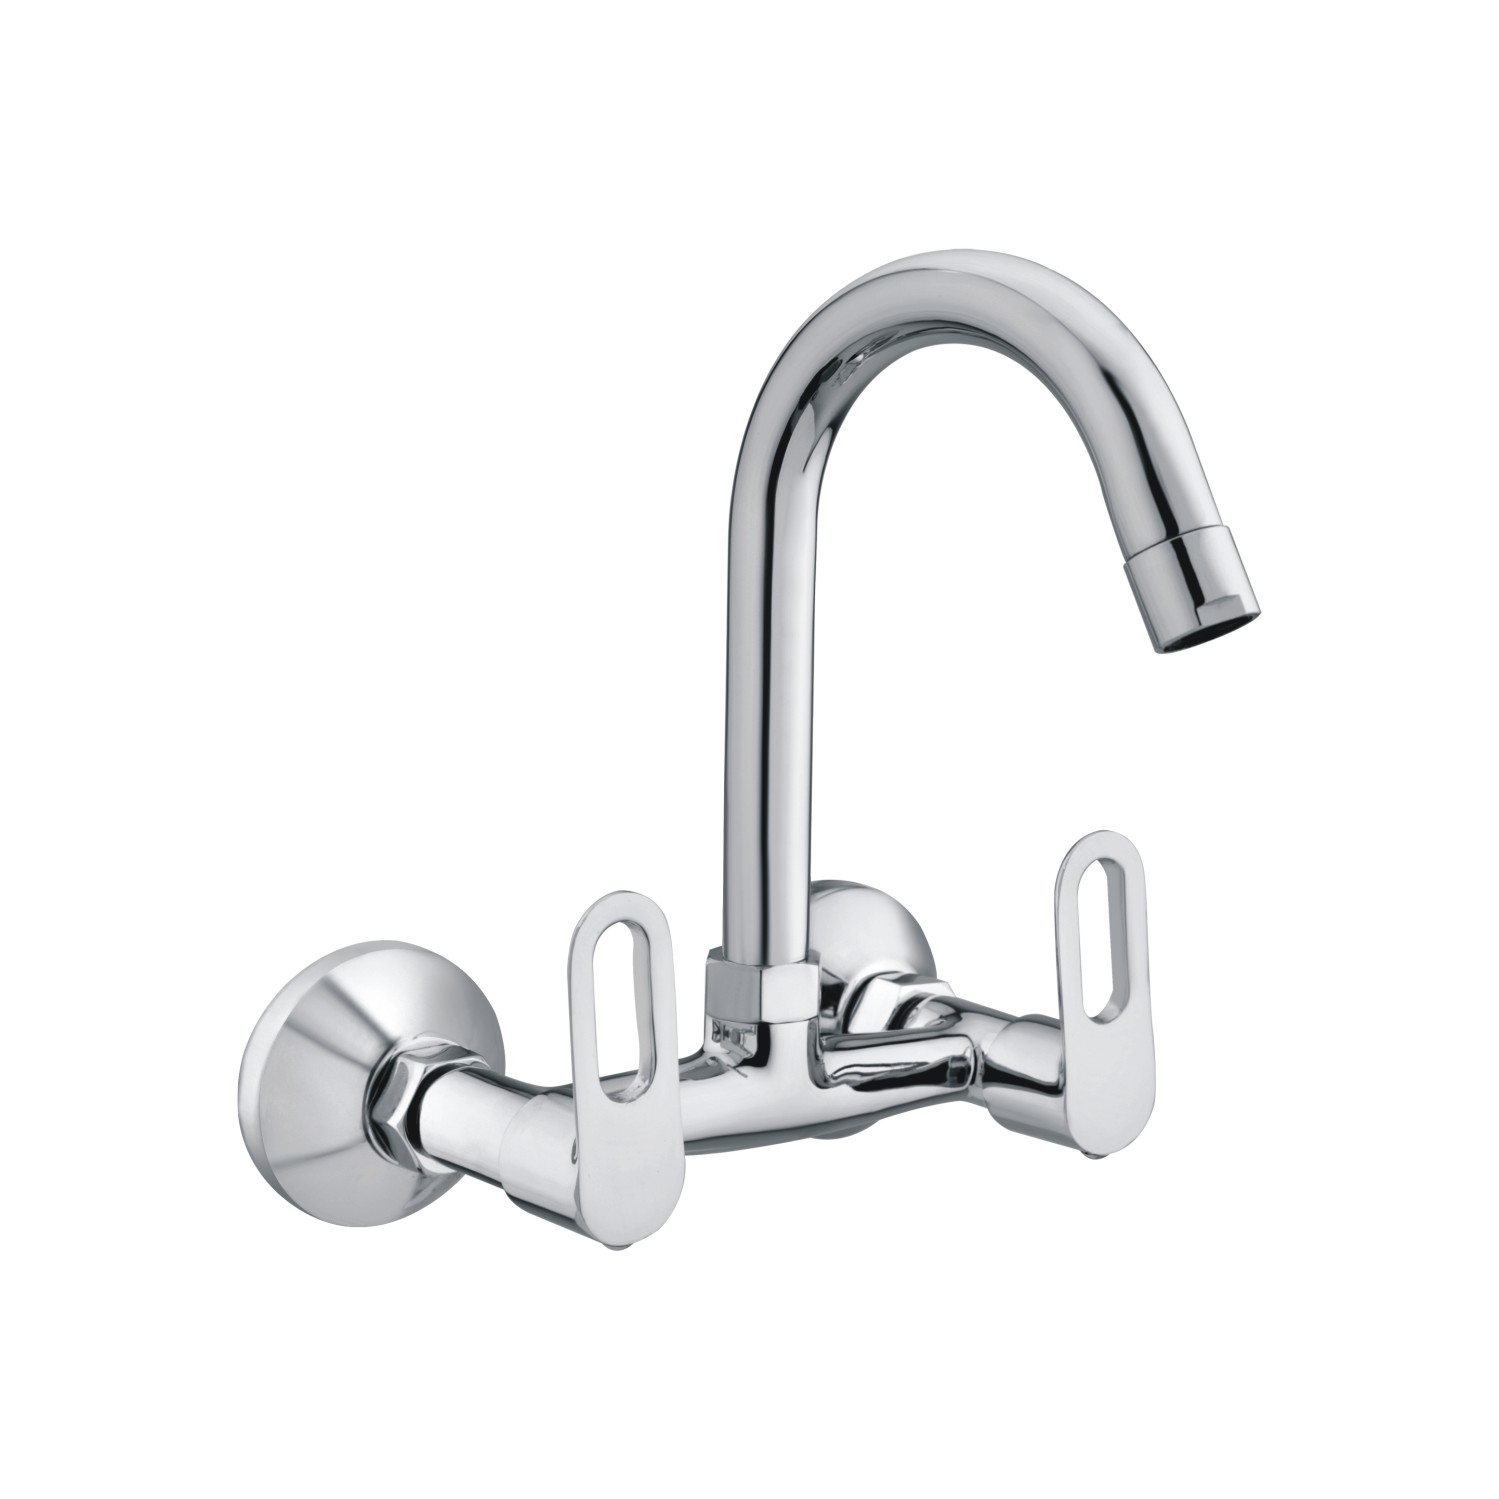 Glamour Sink Mixer with Swivel Spout